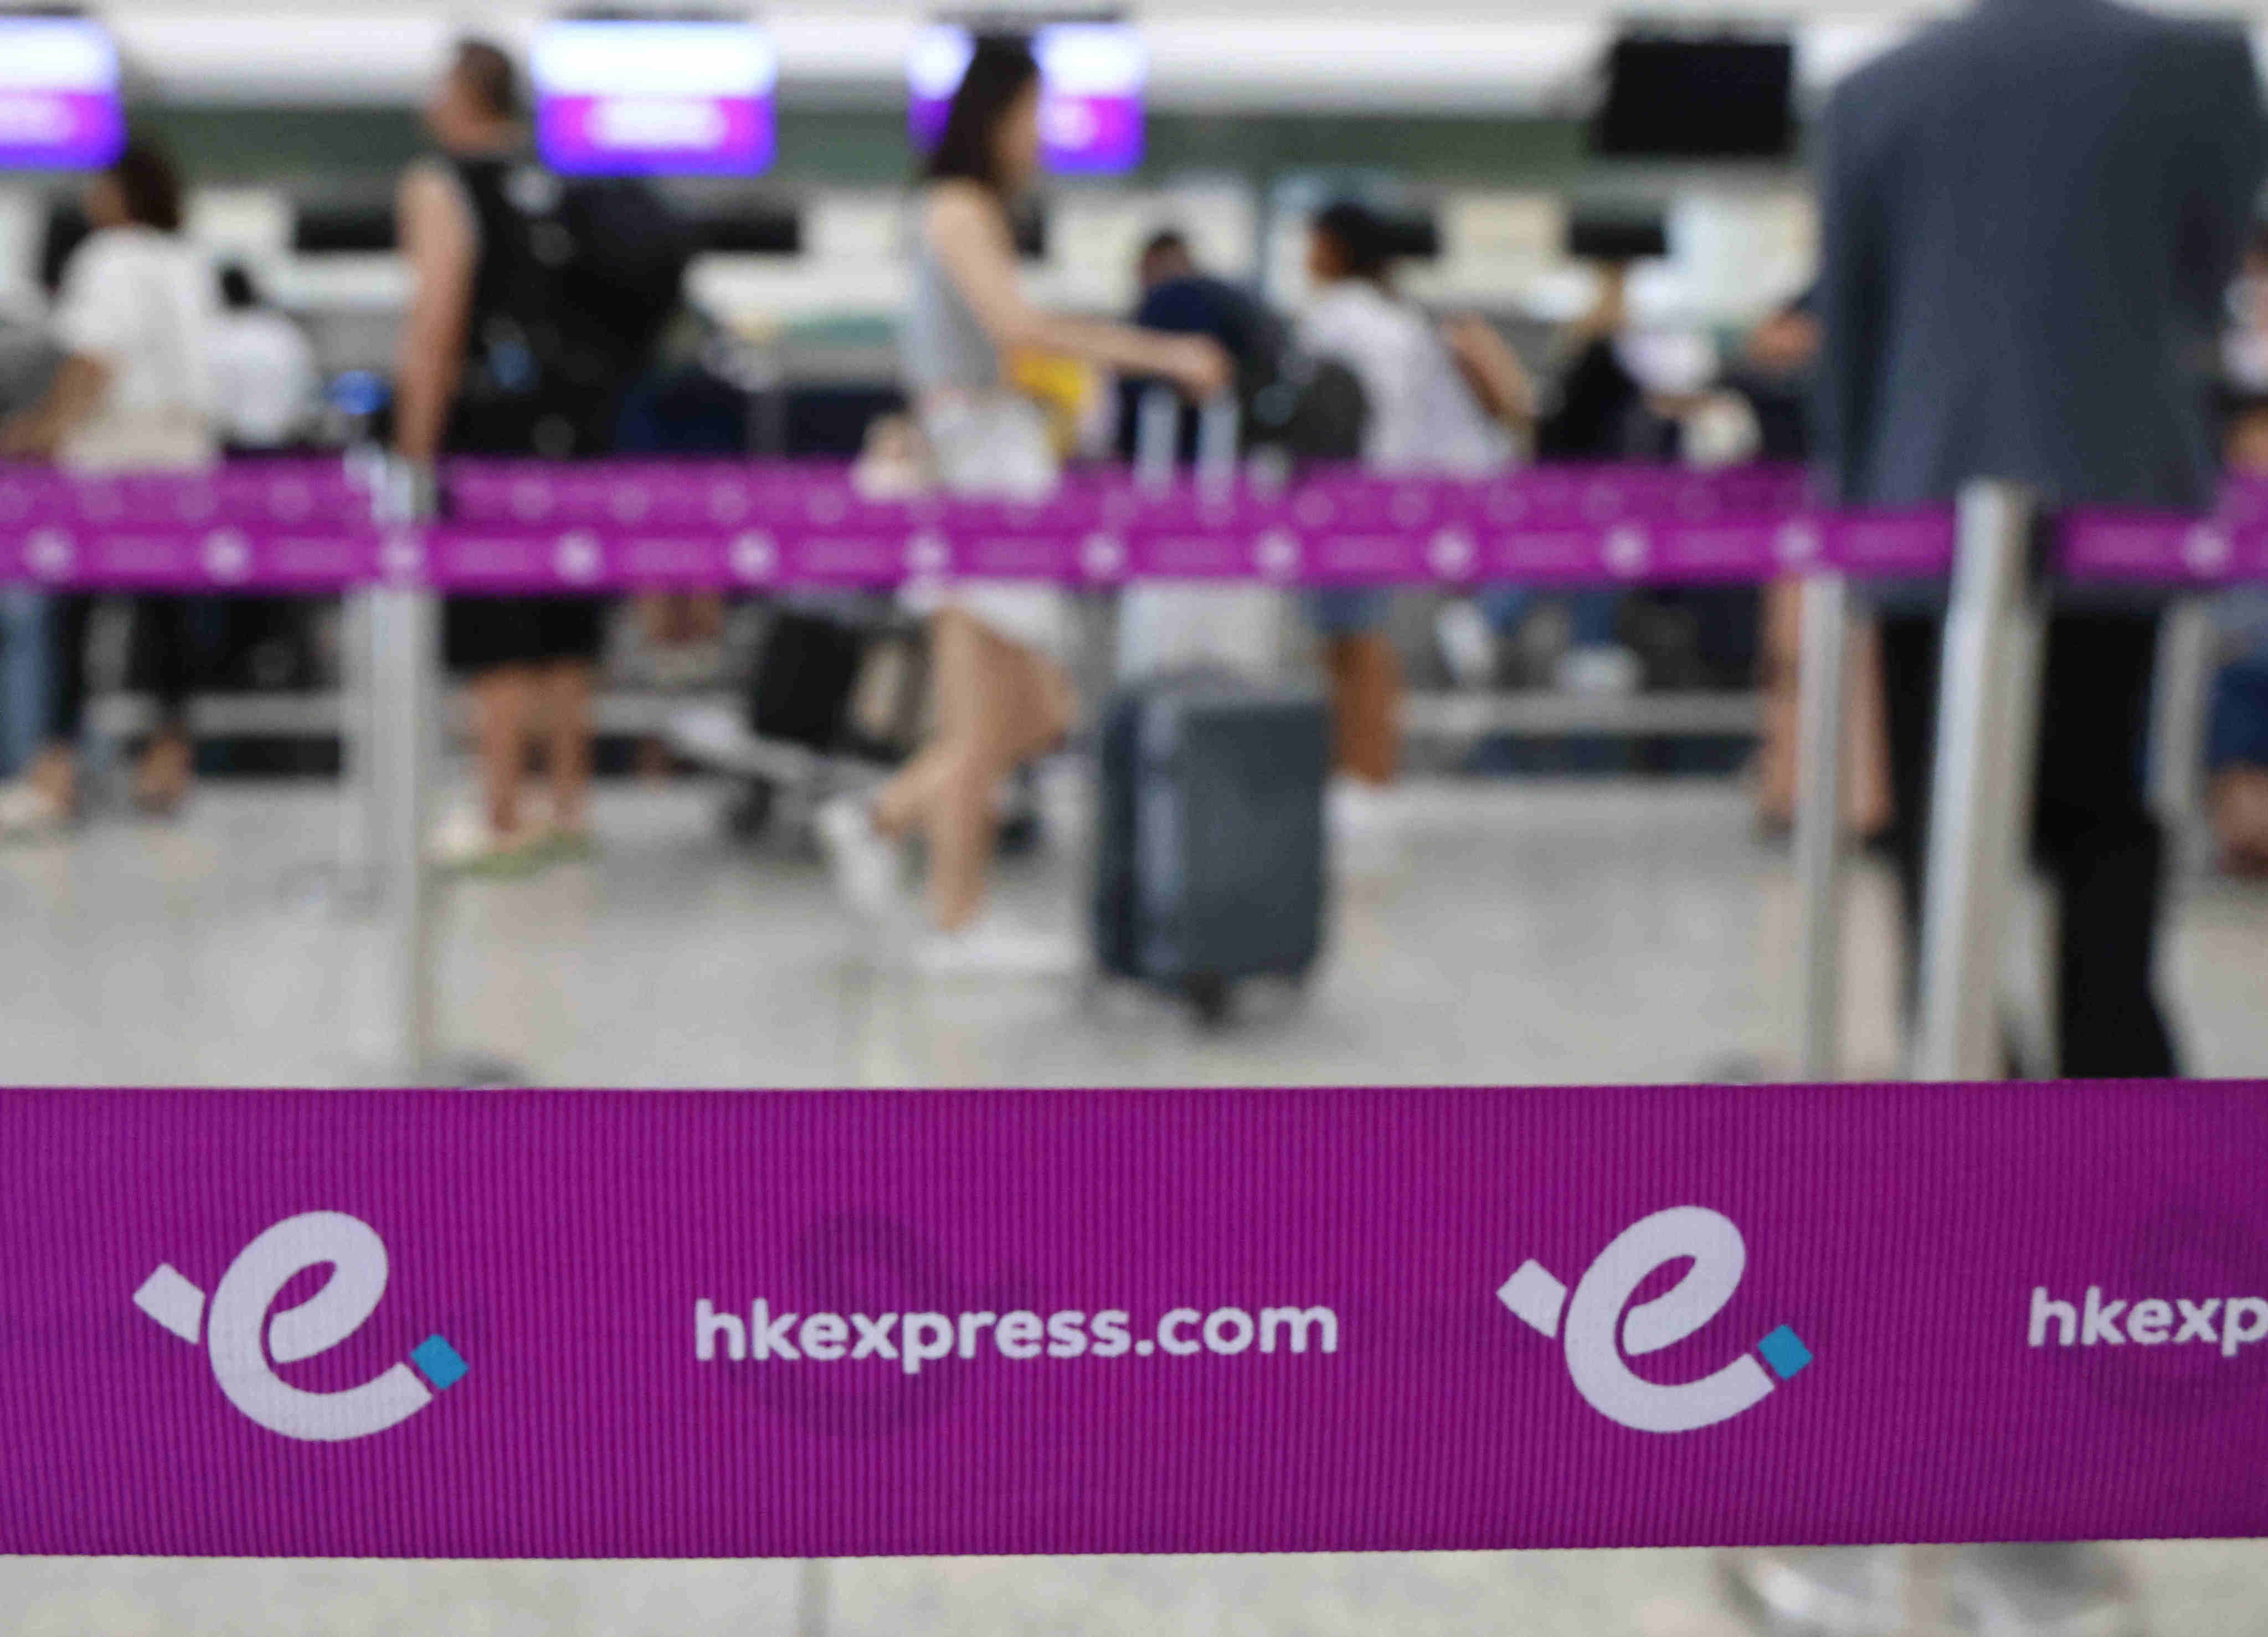 HK Express has promised to boost staff training after two visually impaired men were ordered off a flight. Photo: Dickson Lee